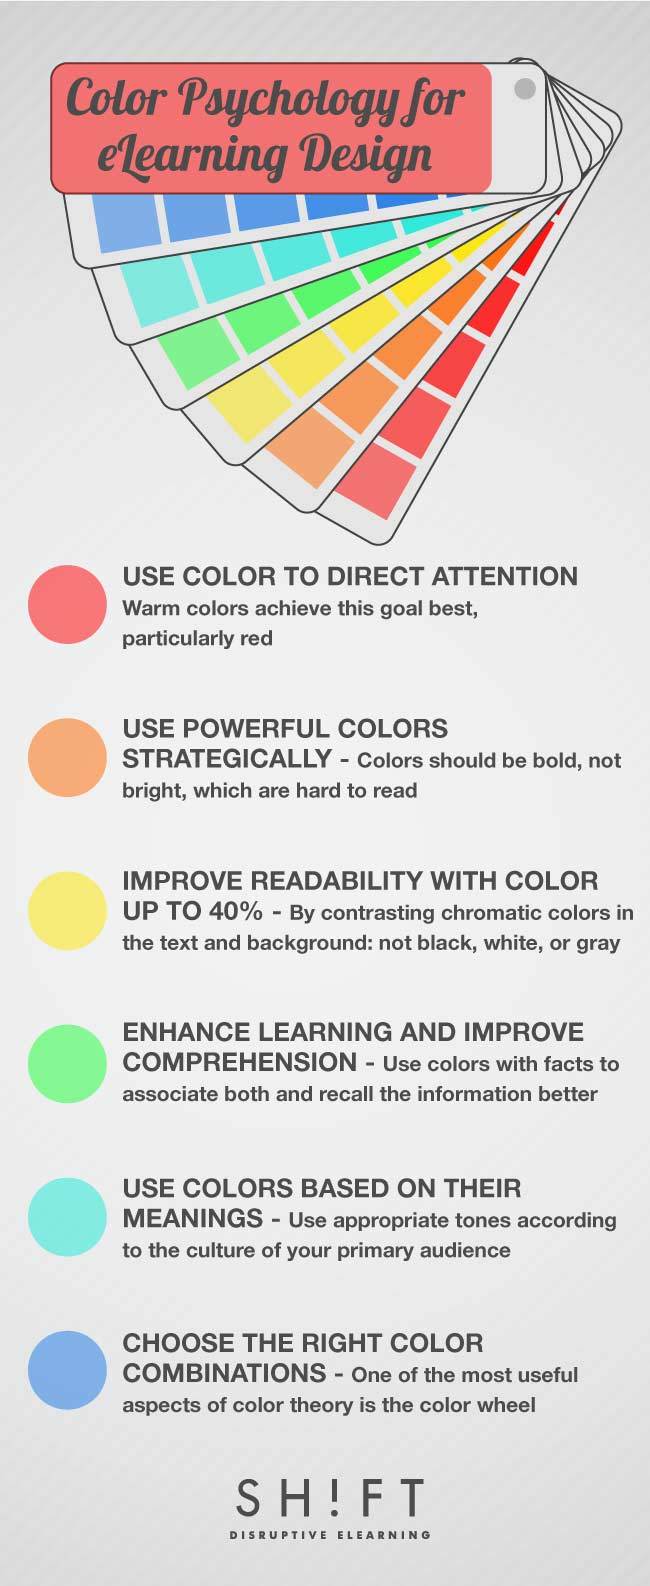 6 Ways Color Psychology Can Be Used to Design Effective eLearning thumbnail